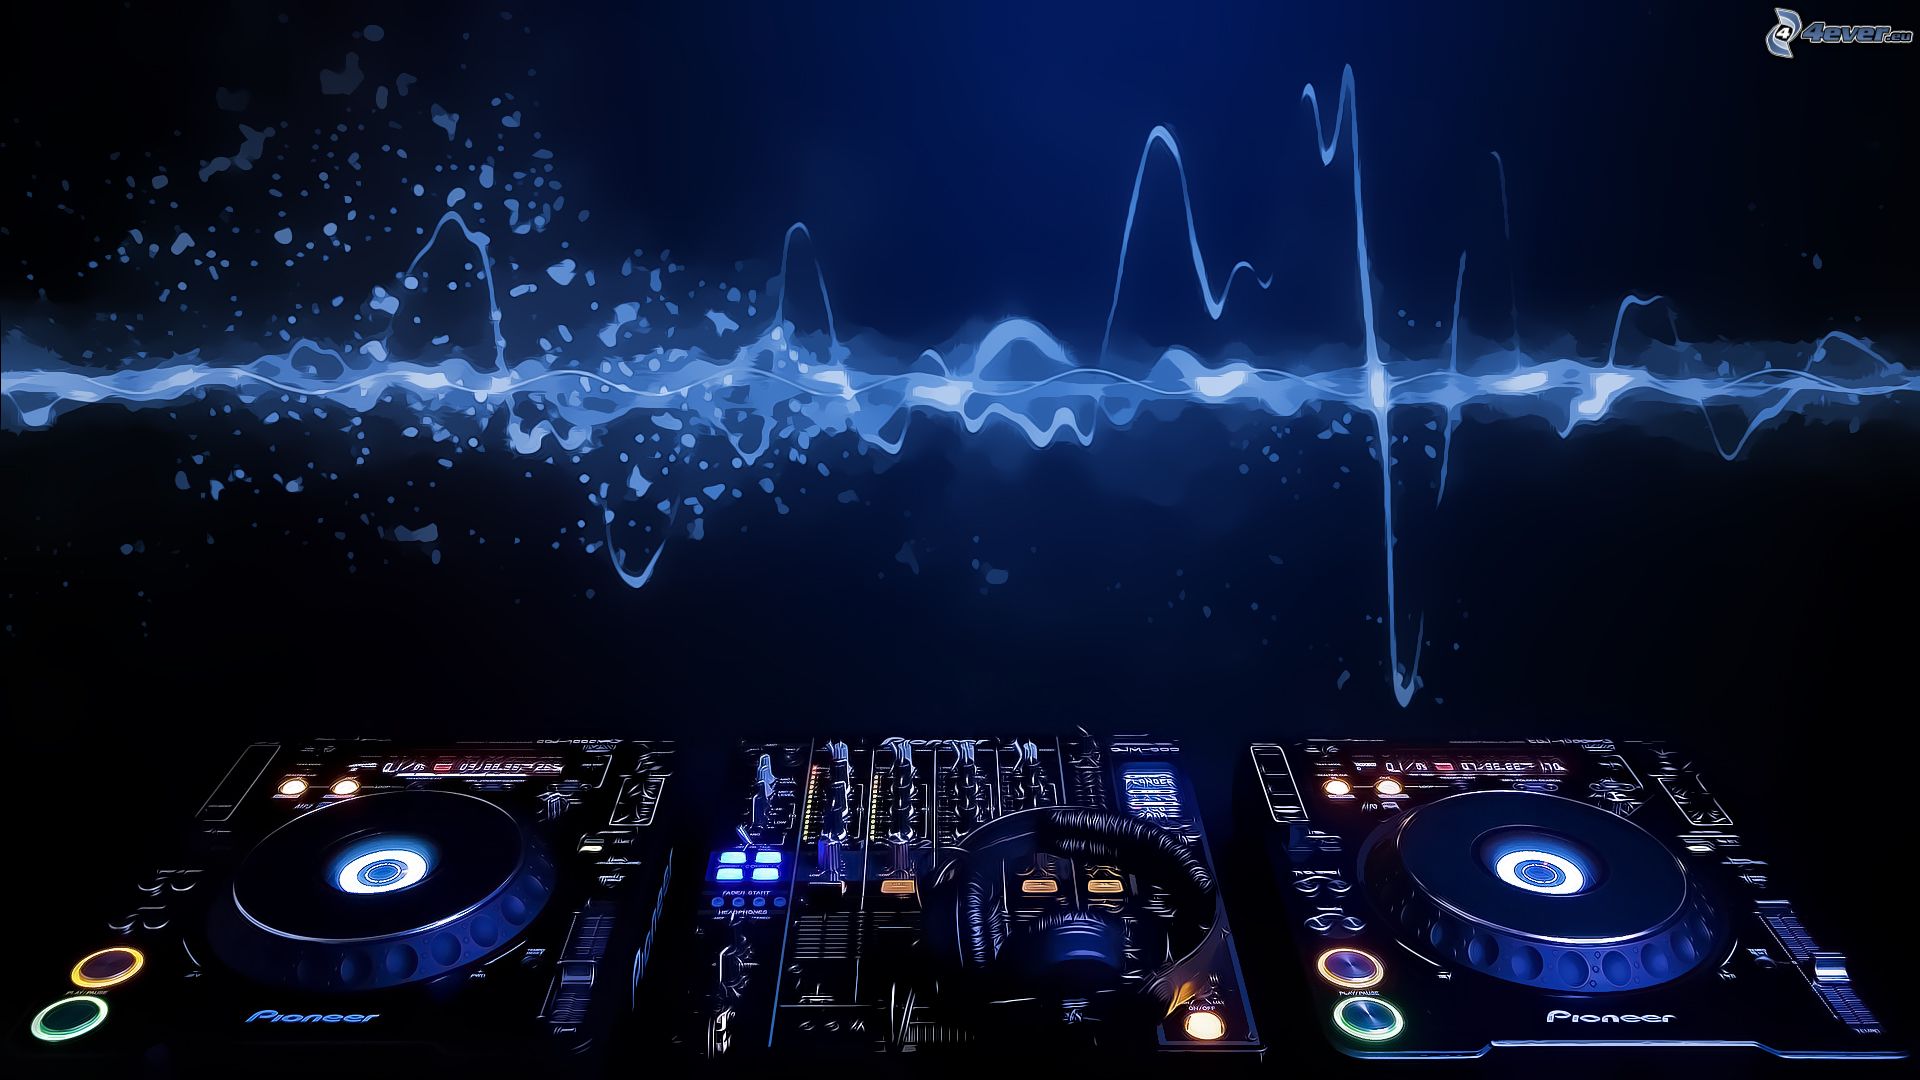 Desktop Background And HD Wallpaper Use This Best Gallery Of Dj